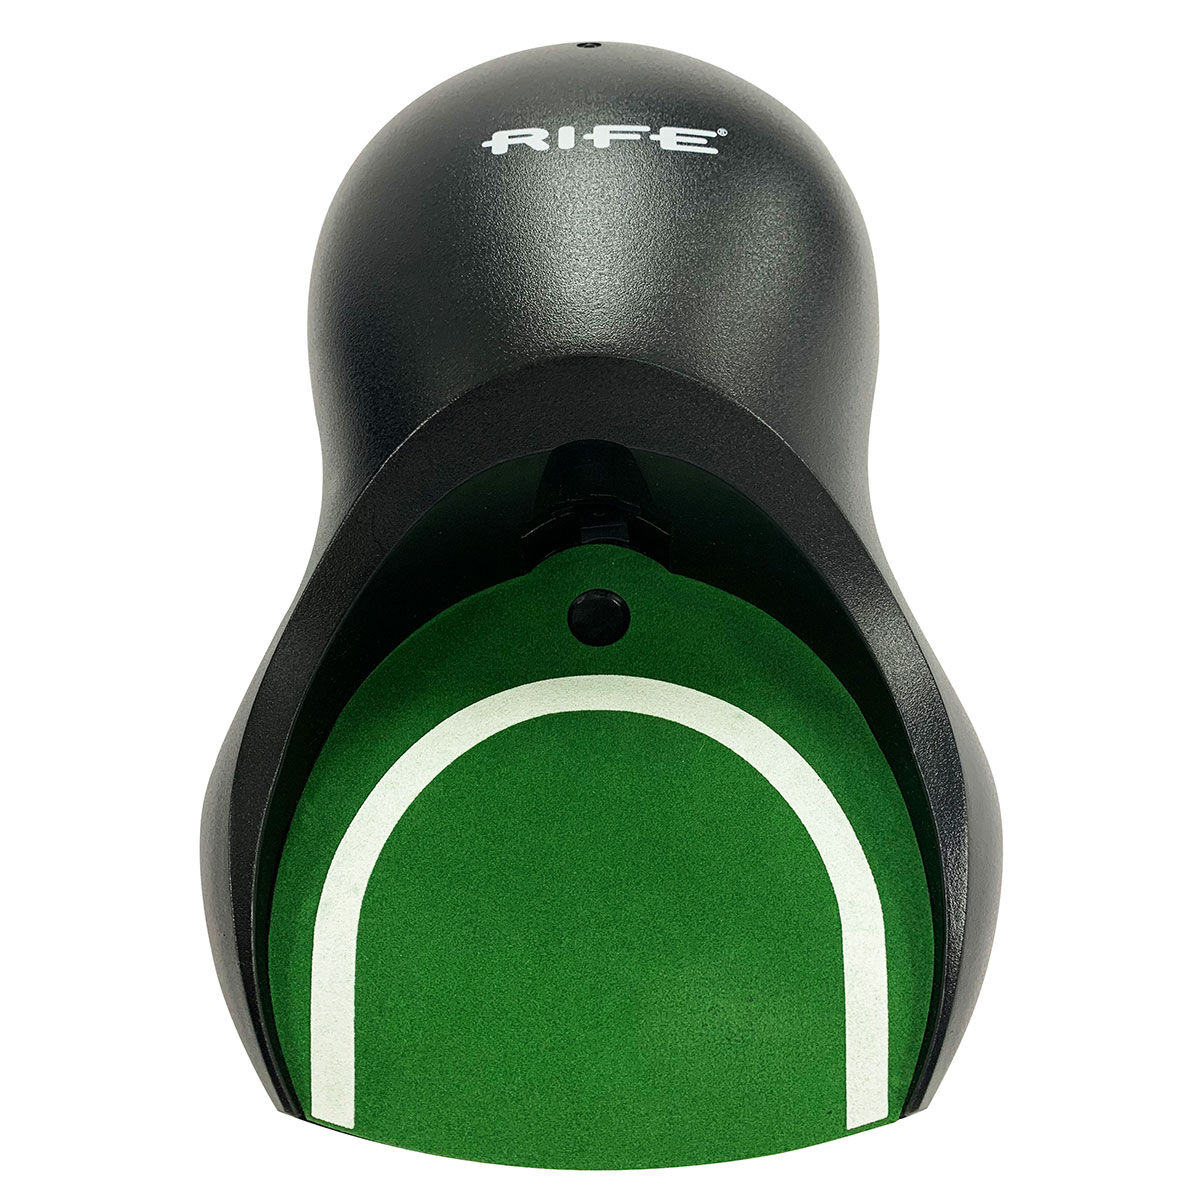 Rife Training Aids, Electric Golf Putting Cup, Mens, Black | American Golf, One Size